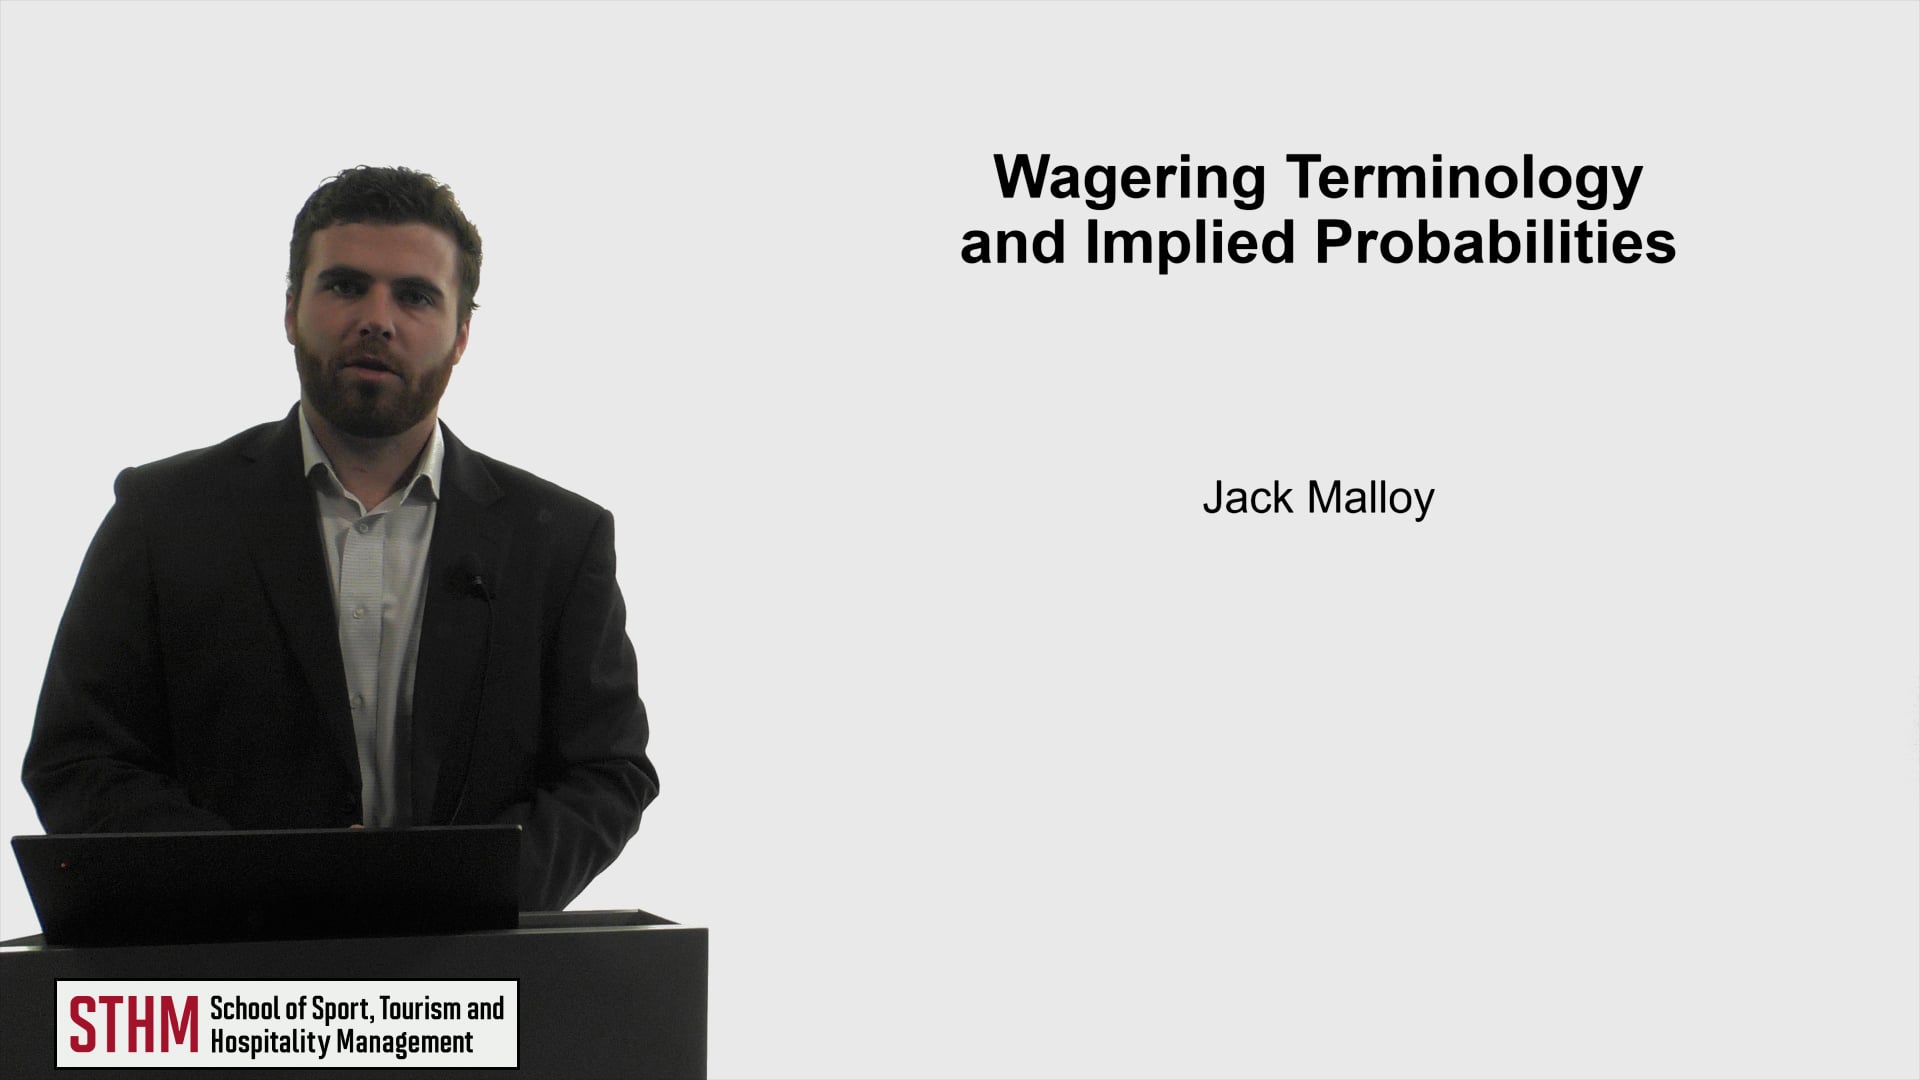 Wagering Terminology and Implied Probabilities